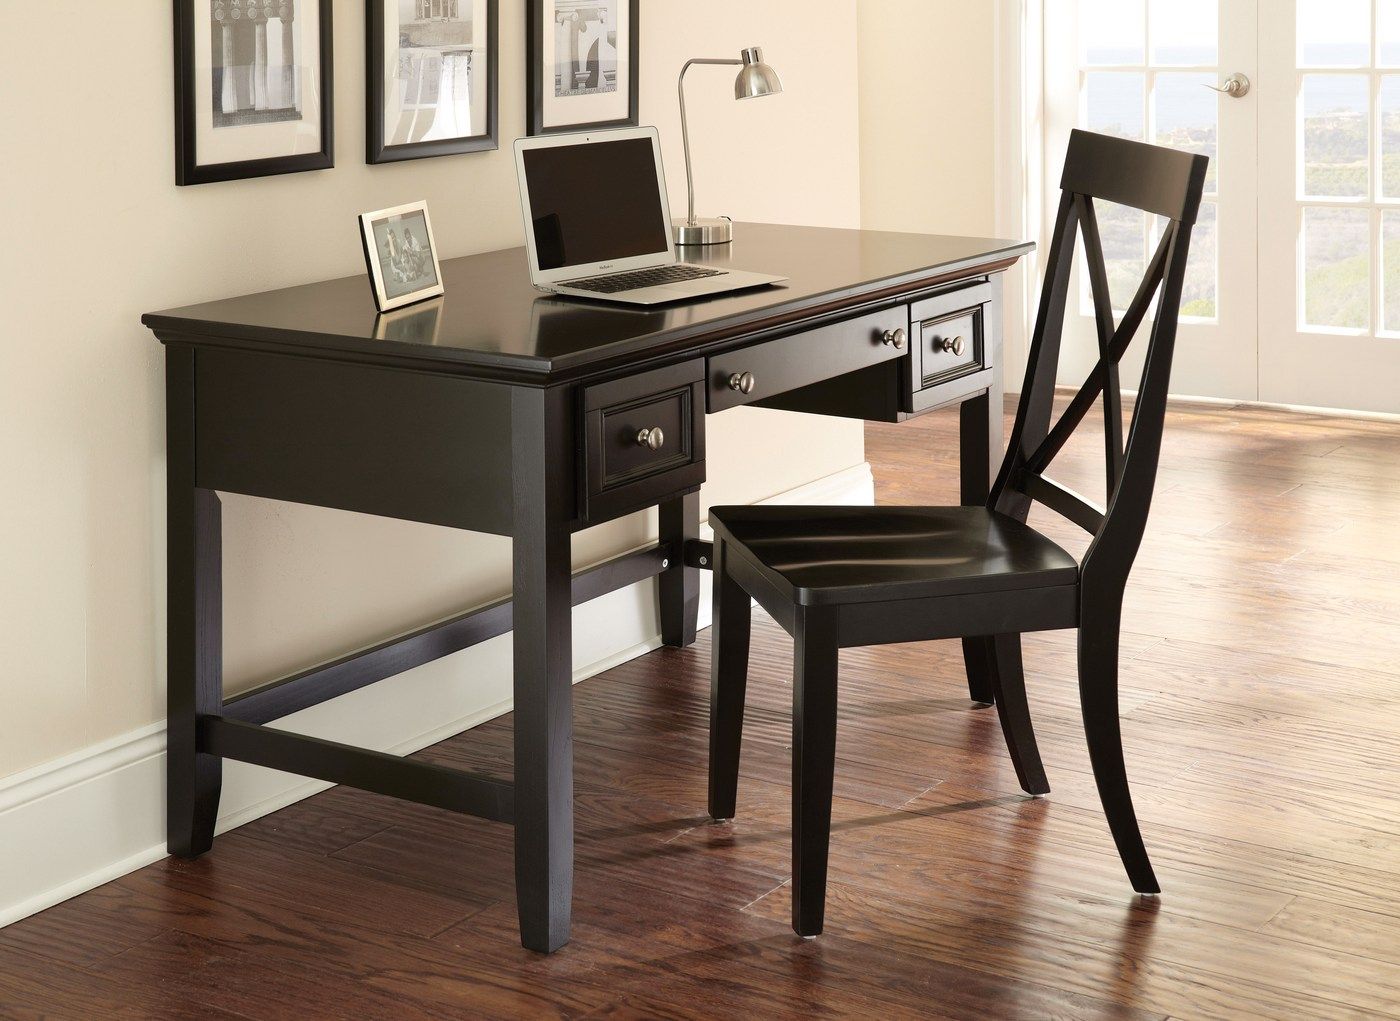 Oslo 54" Painted Black Writing Desk With Flip Down Keyboard Tray Within Natural And Black Wood Writing Desks (View 1 of 15)